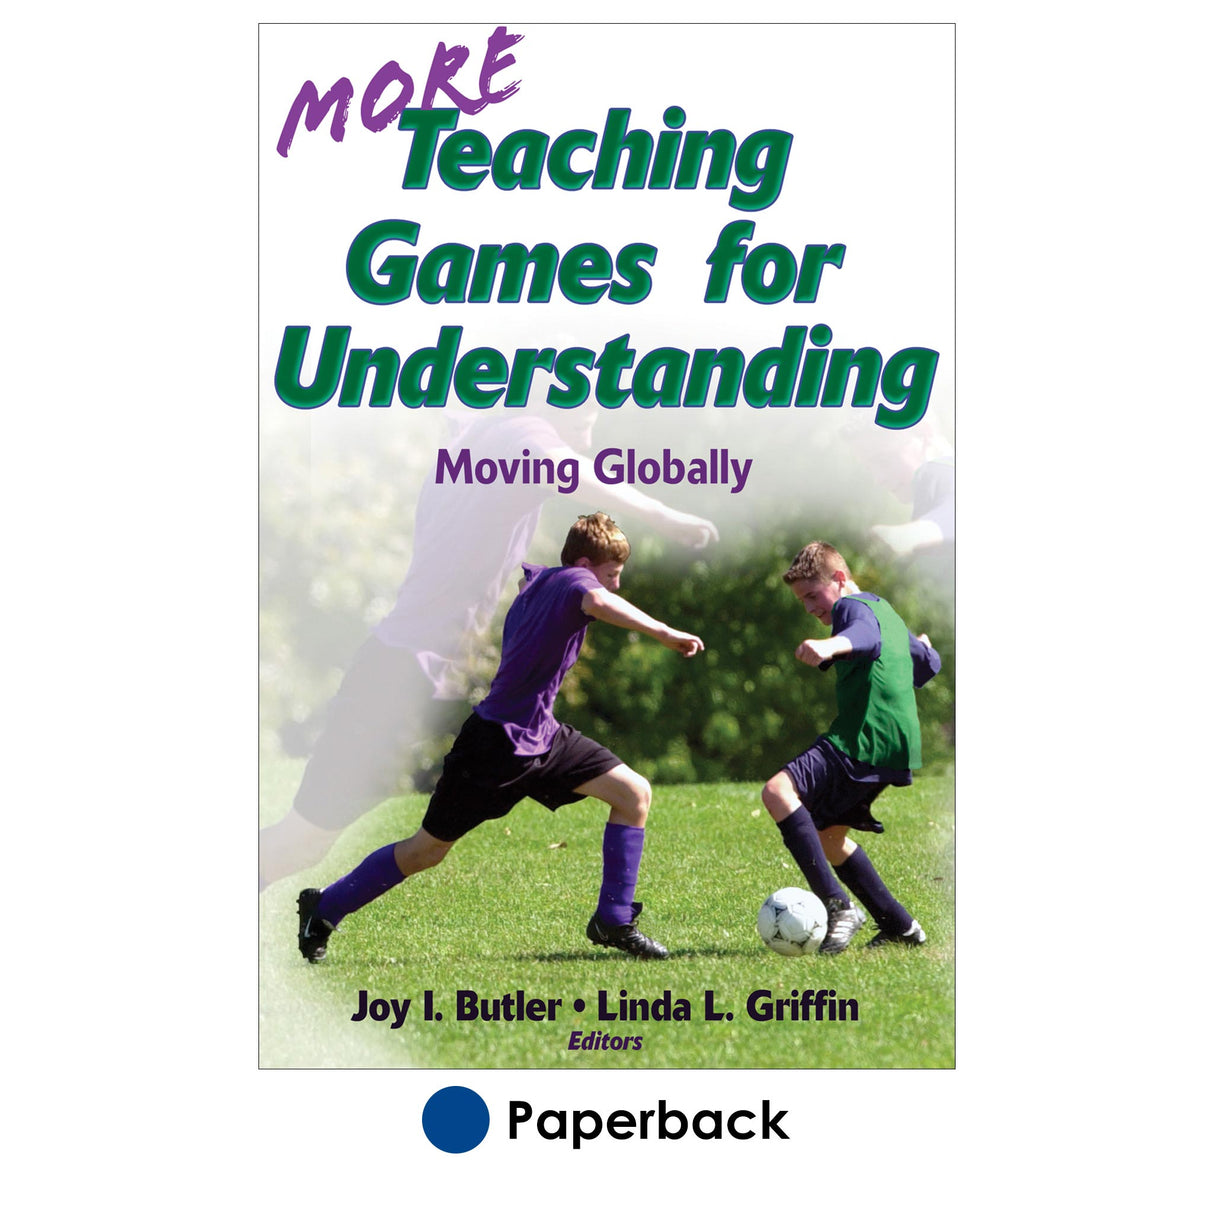 More Teaching Games for Understanding:Theory, Research & Practice